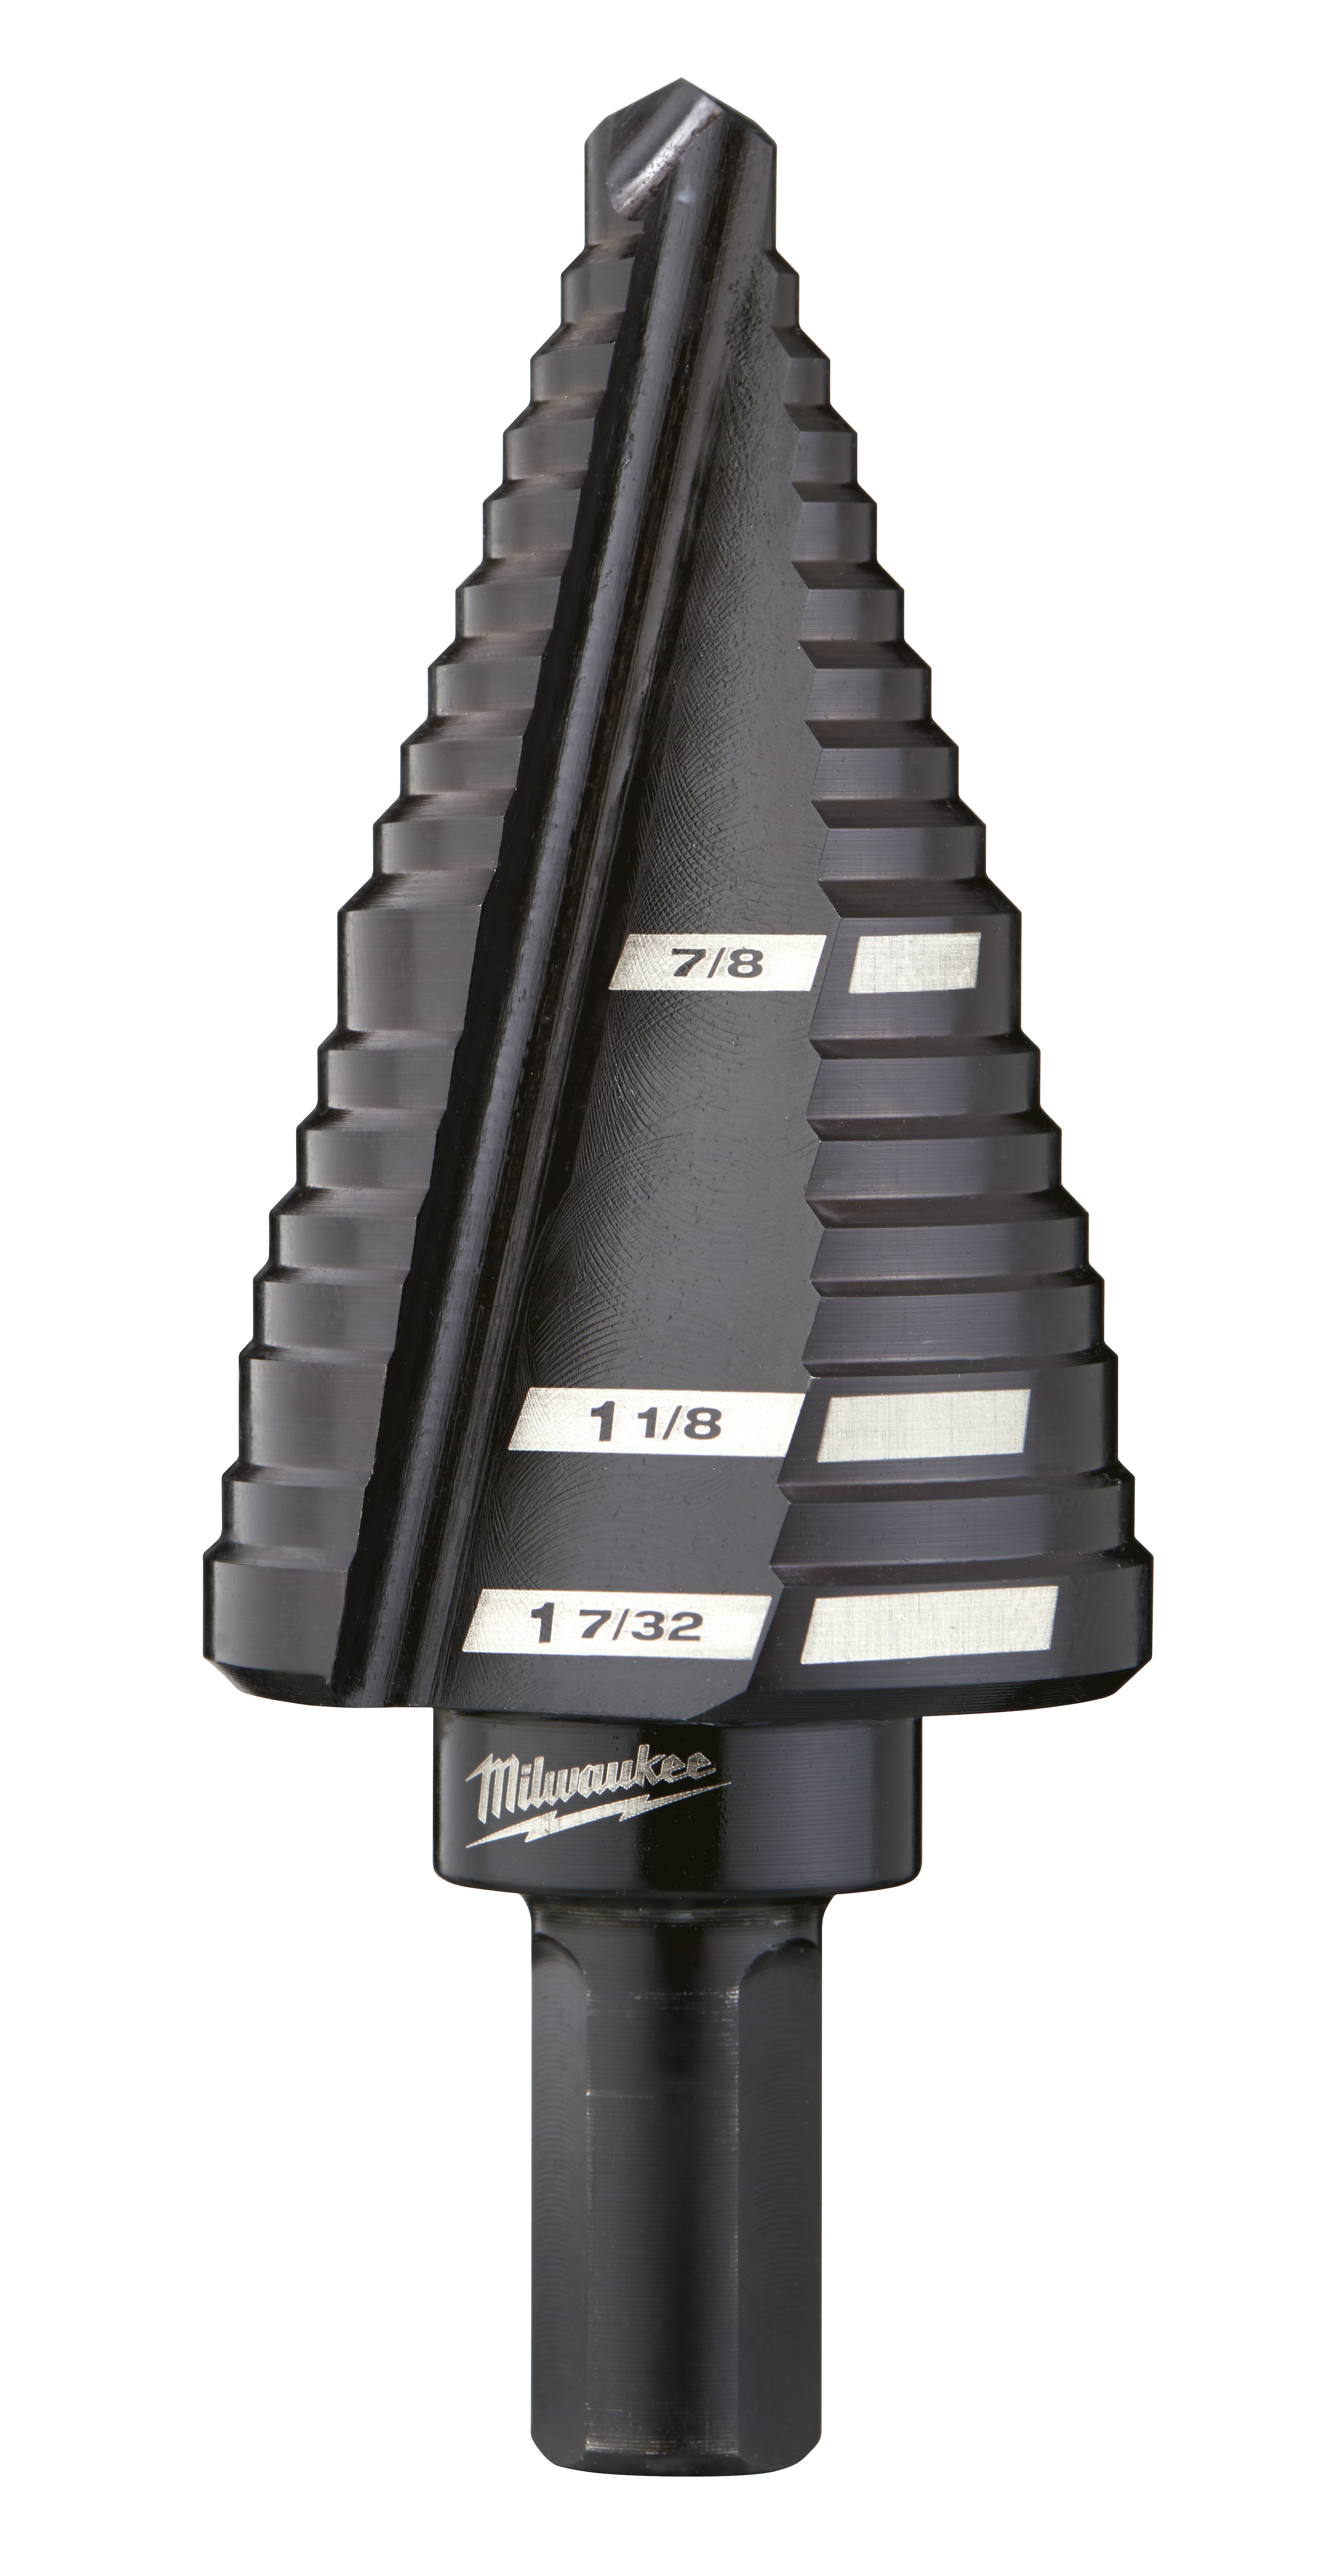 #11 Step Drill Bit, 7/8 in. to 1-7/32 in.